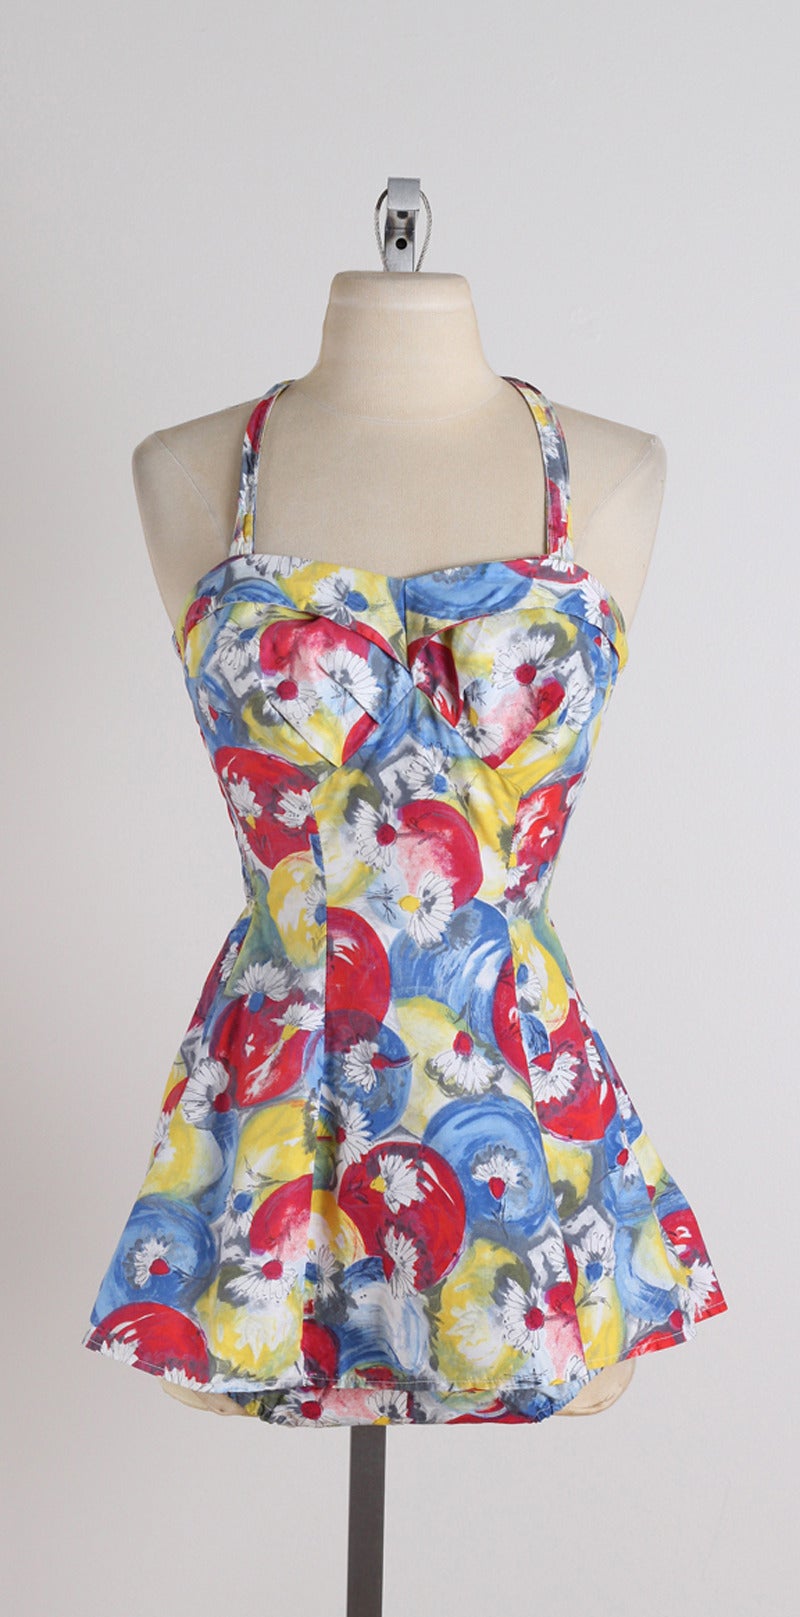 Vintage 1950s Kittiwake Red and Blue Watercolor Cotton Swimsuit 5